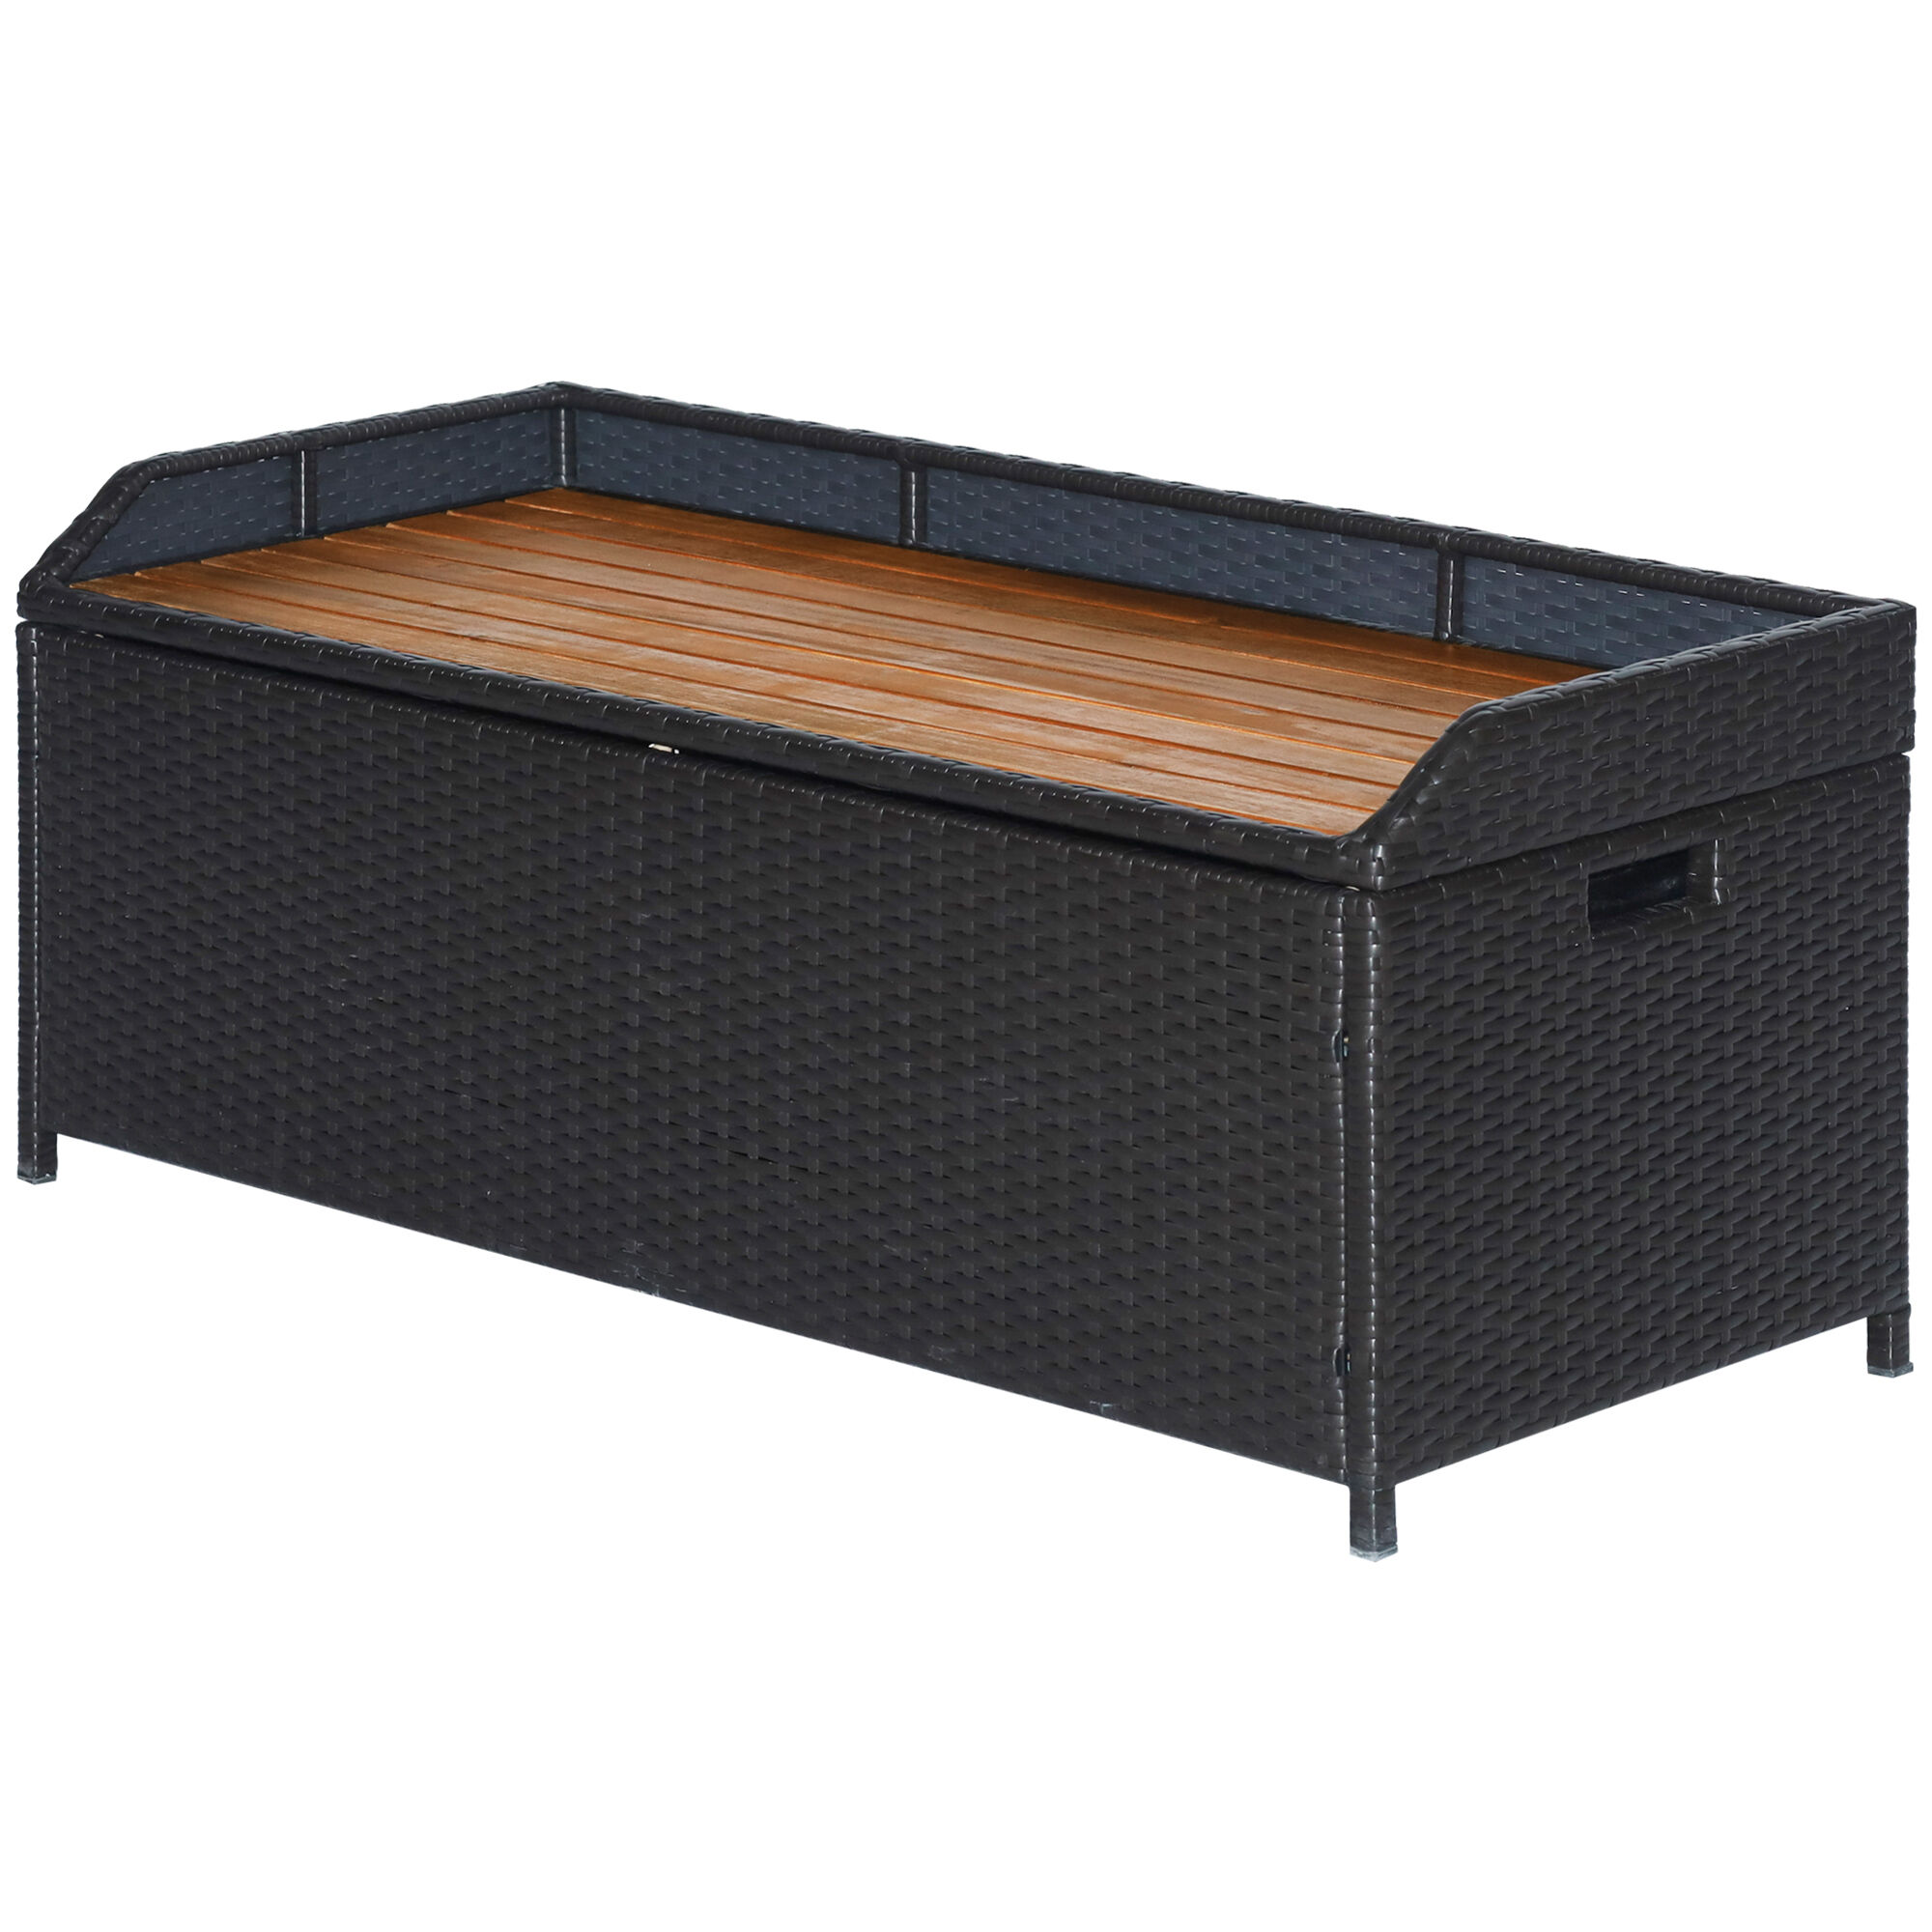 Outsunny Outdoor Storage Bench Patio Wicker Furniture with Wooden Seat, Gas Spring, Rattan Container Bin with Lip, Ideal for Storing Tools, Black